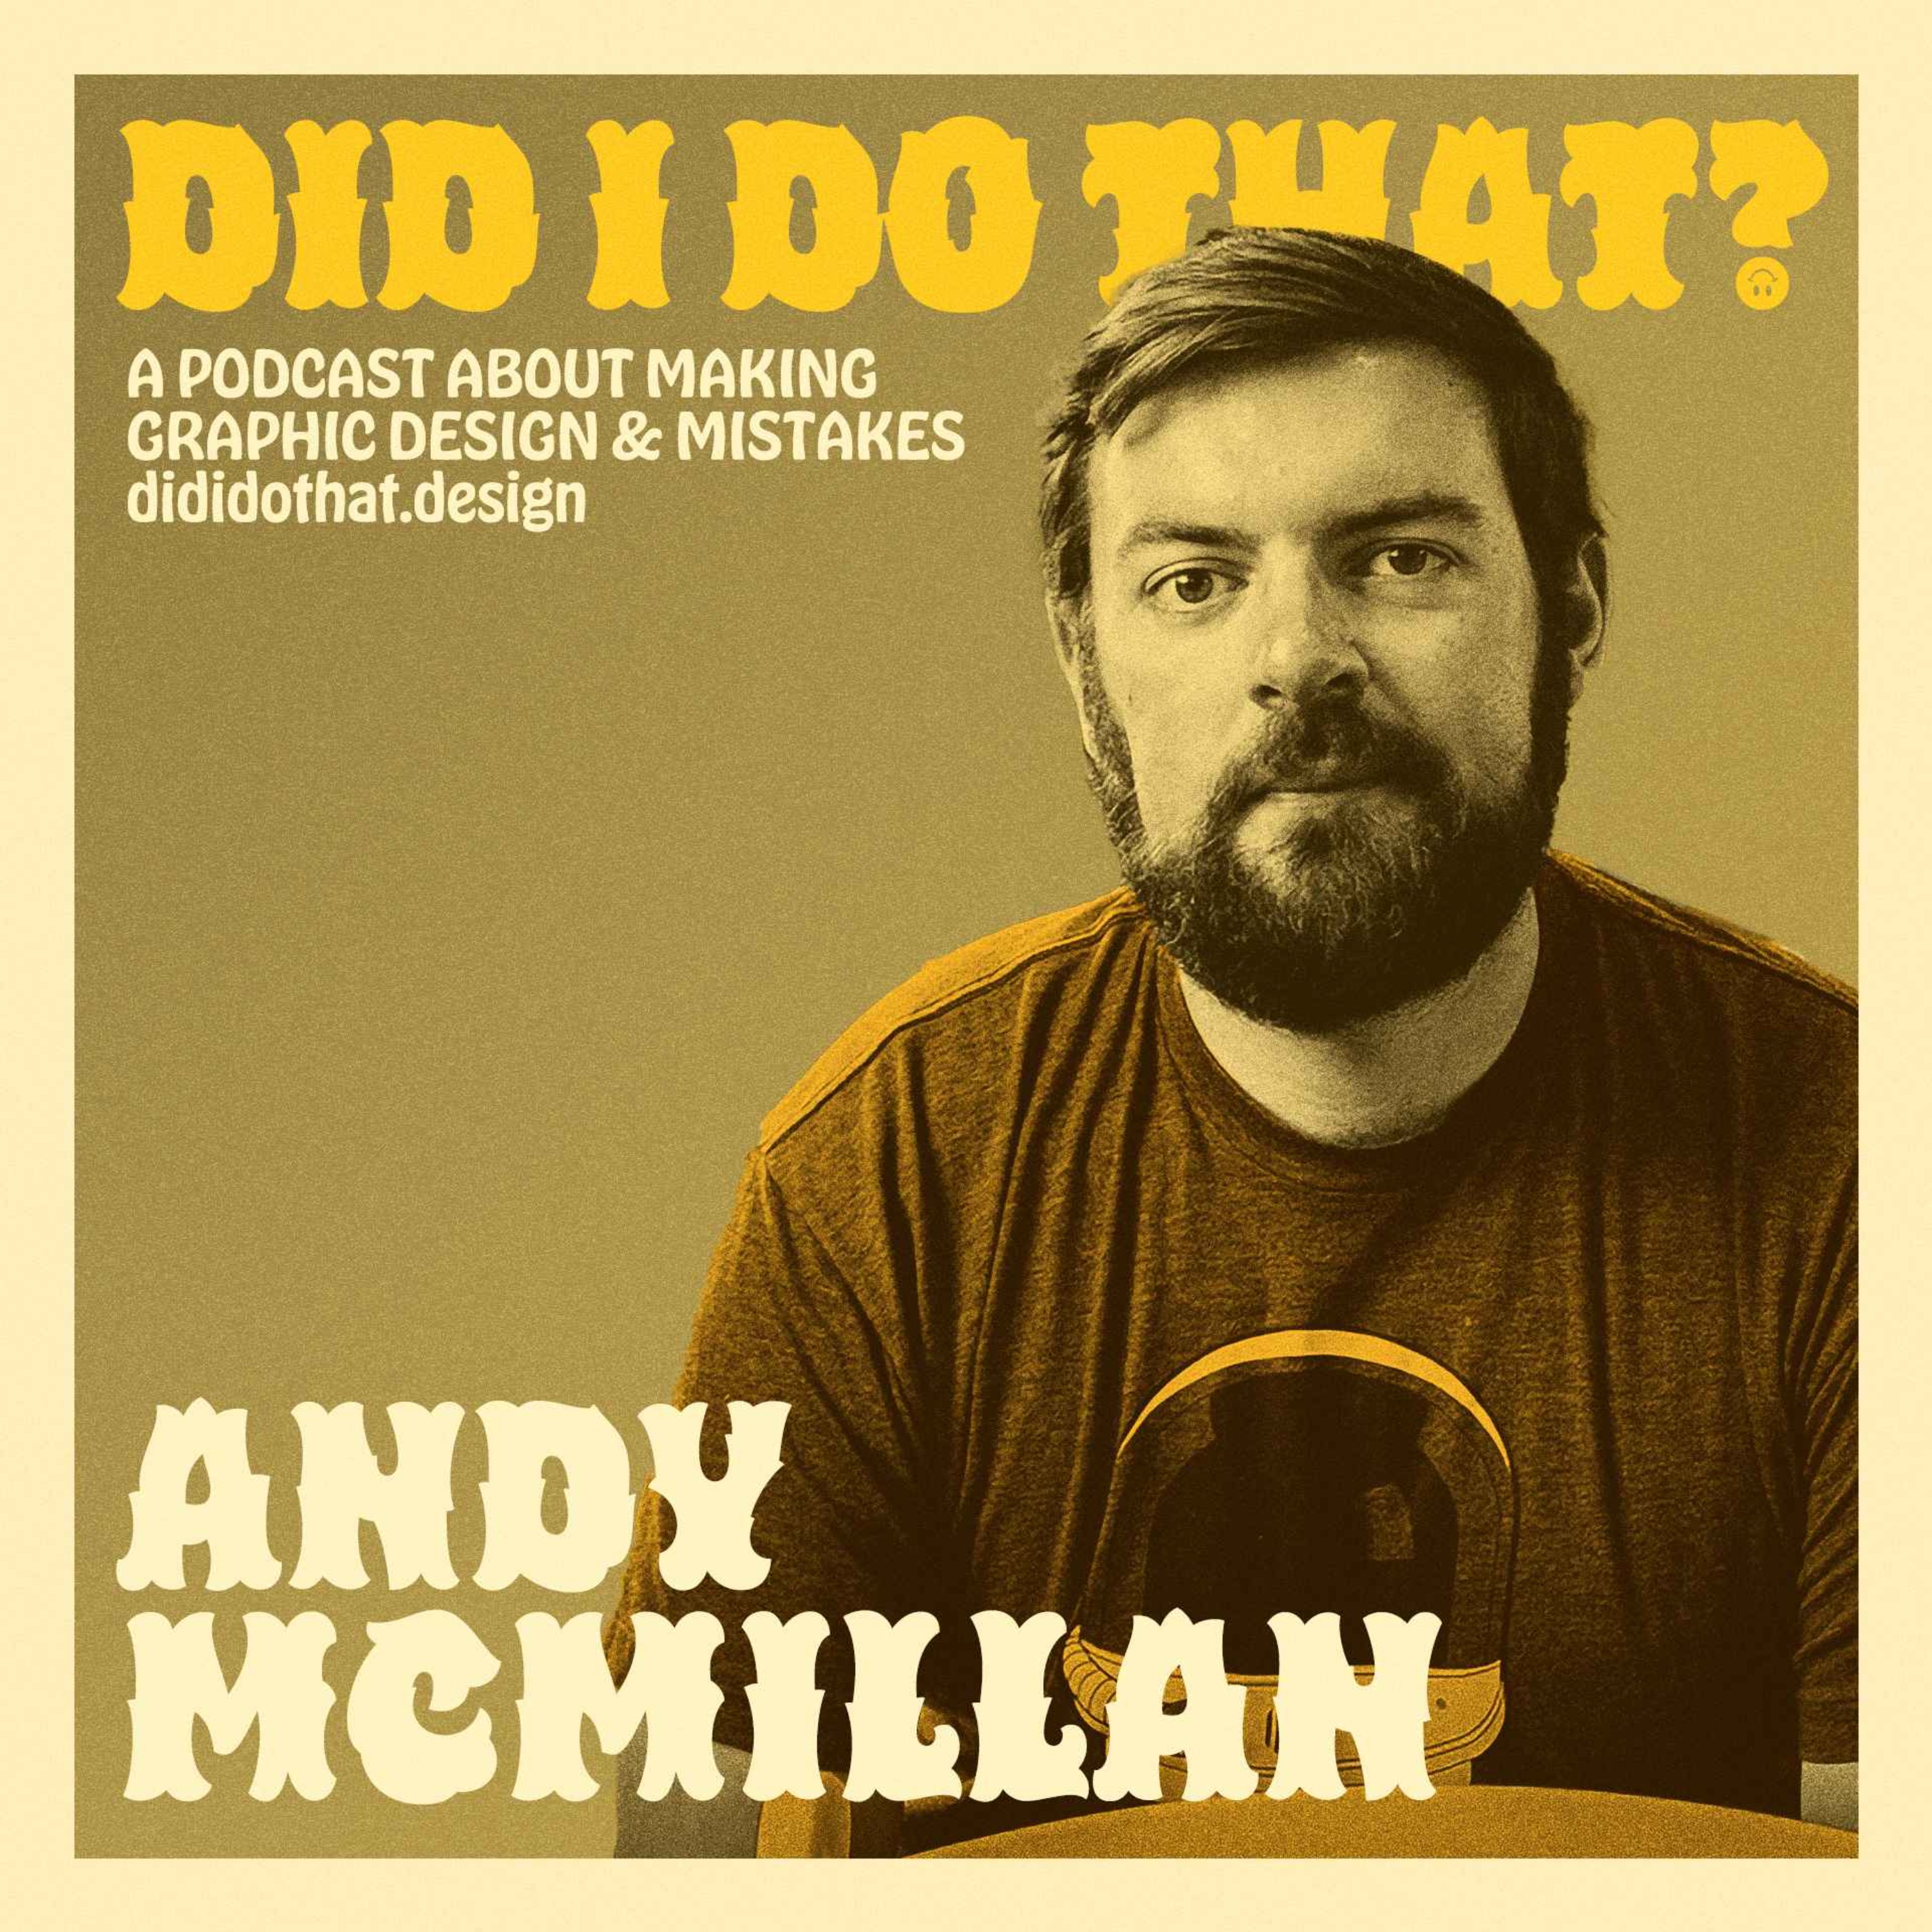 You Seem Competent (with Andy McMillan)